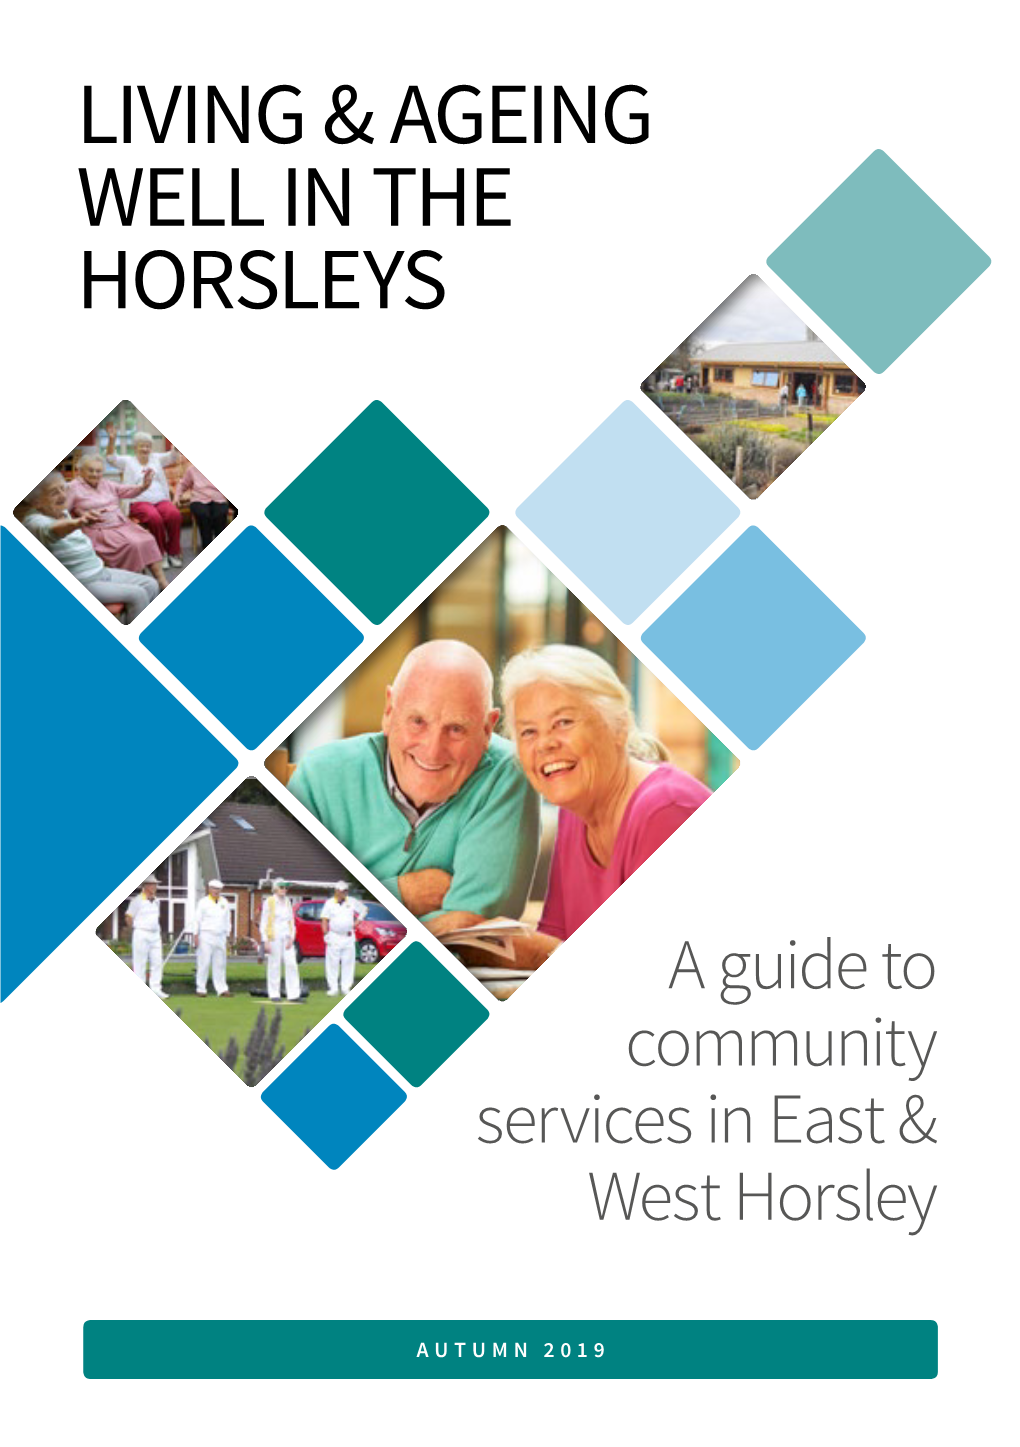 Living & Ageing Well in the Horsleys